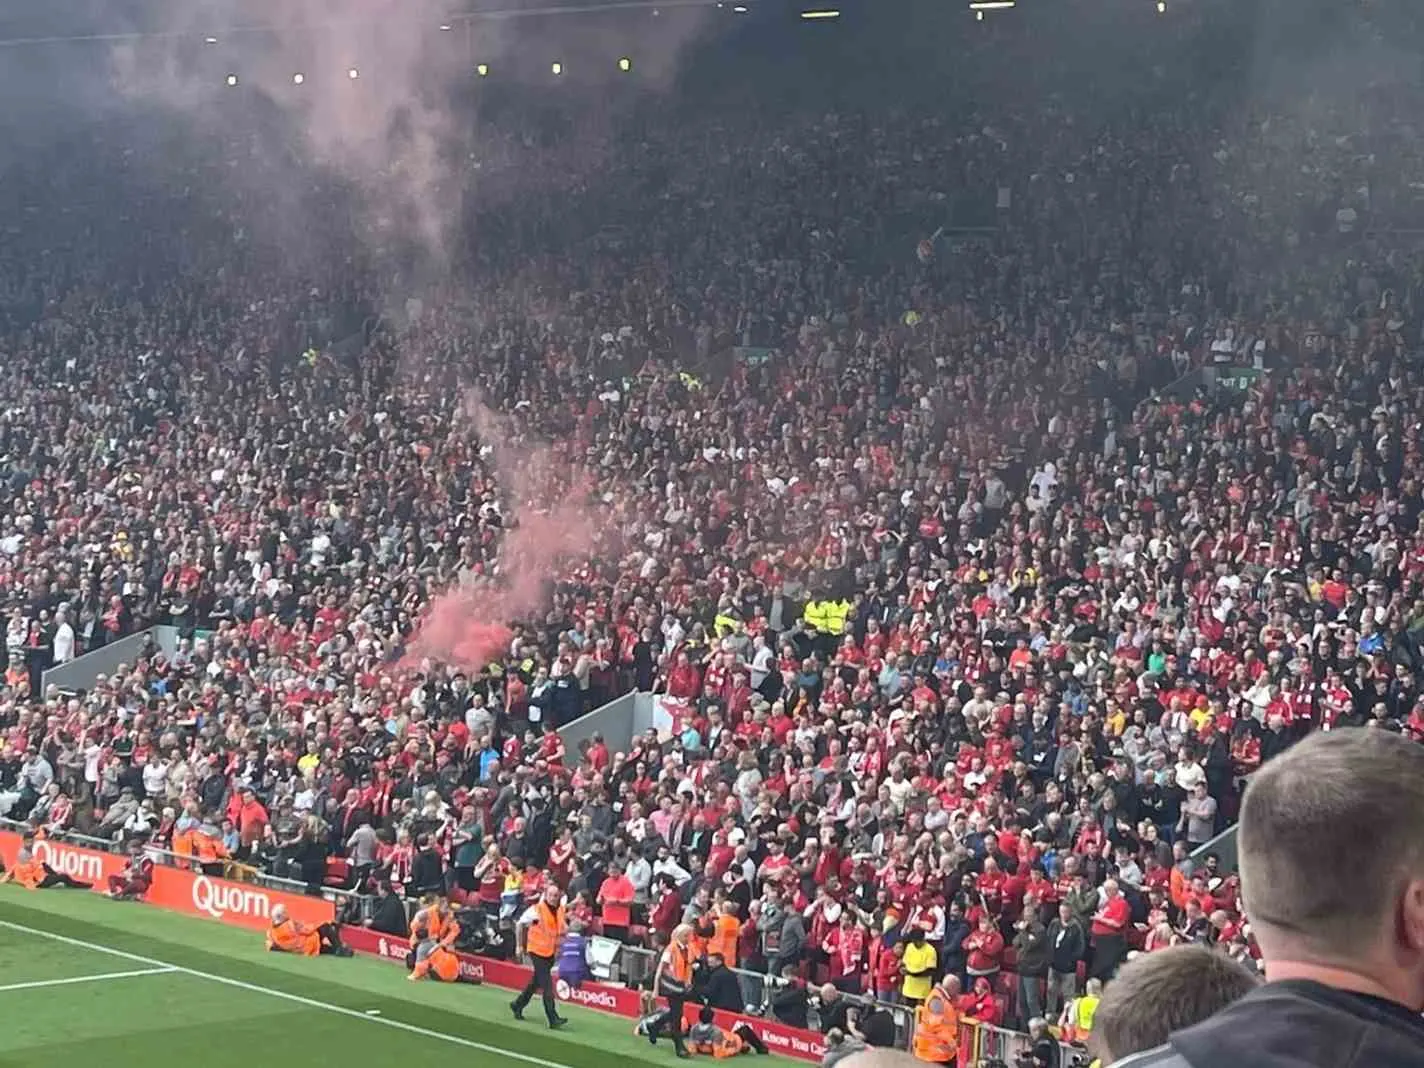 The photo shows Liverpool fans letting off a flare after thinking Aston Villa had equalized against Man City